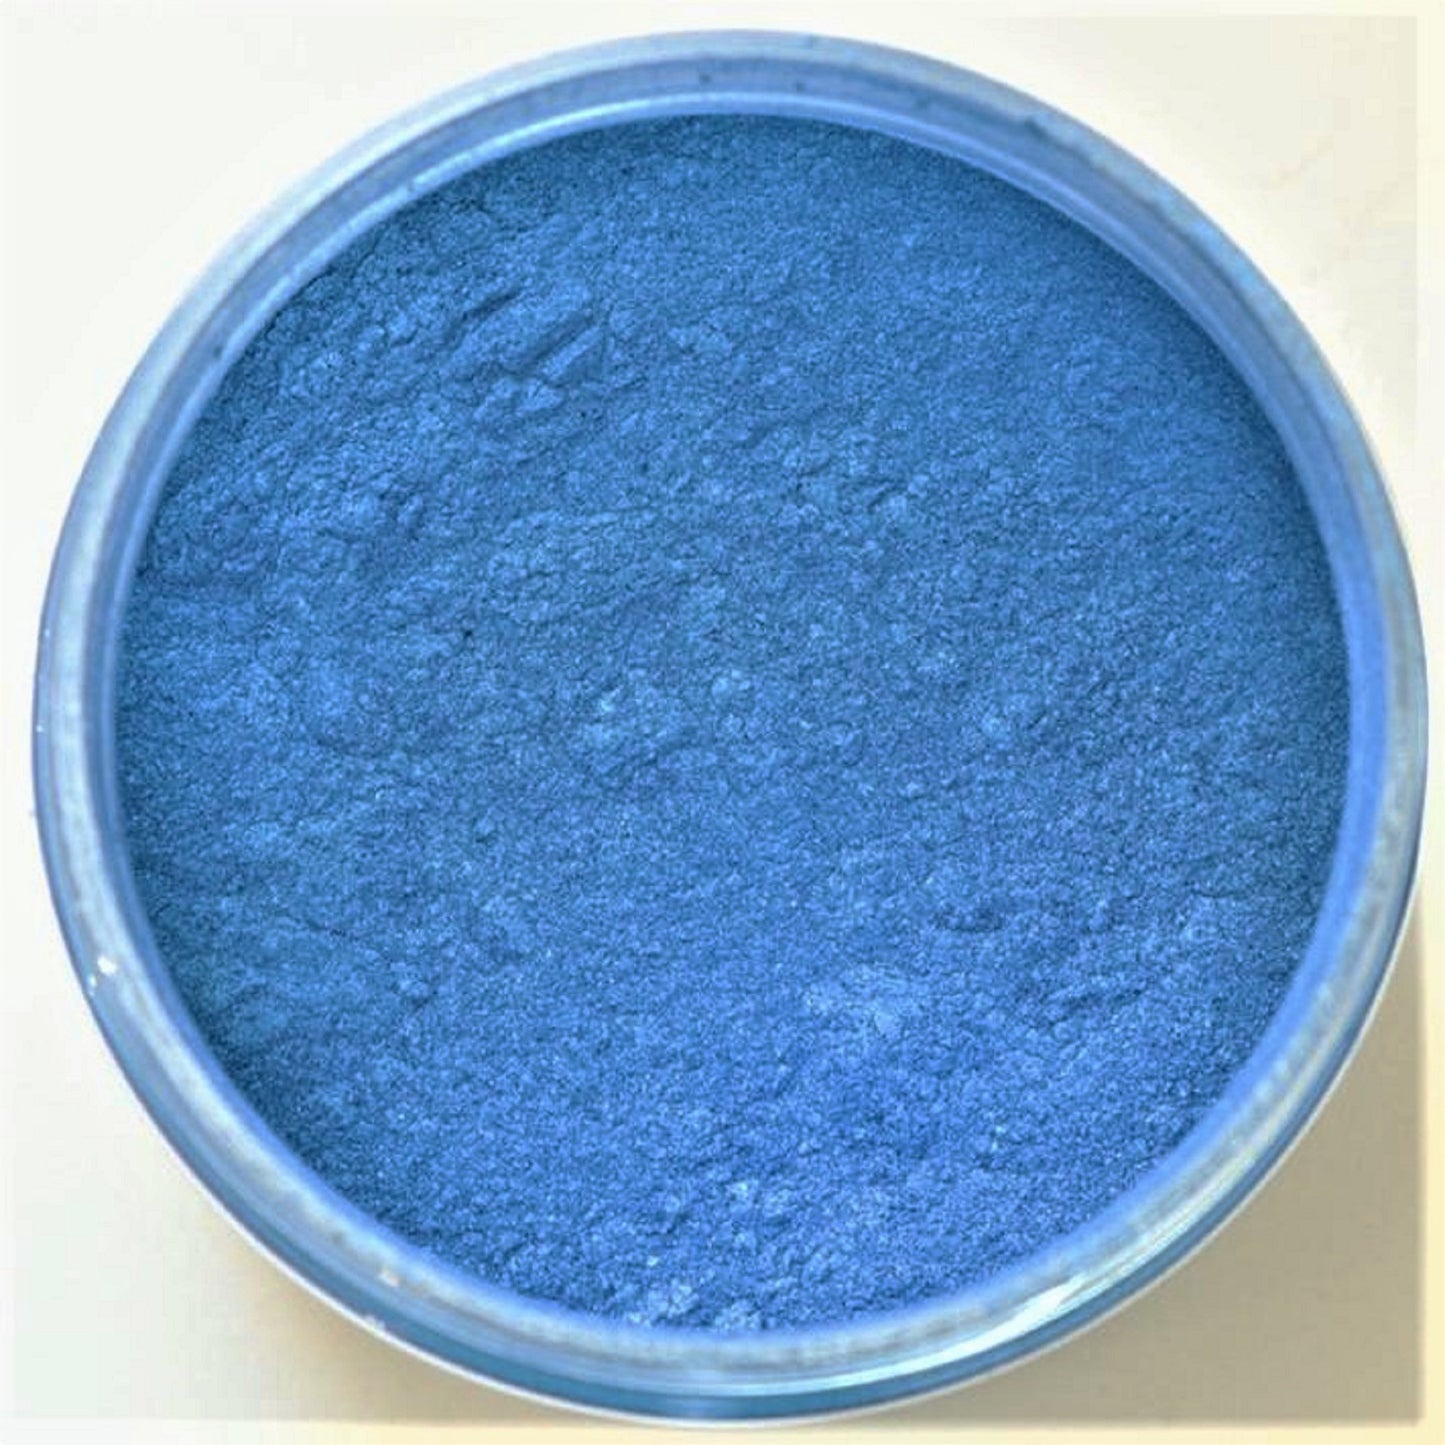 Mica Powdered Pigments - 25g